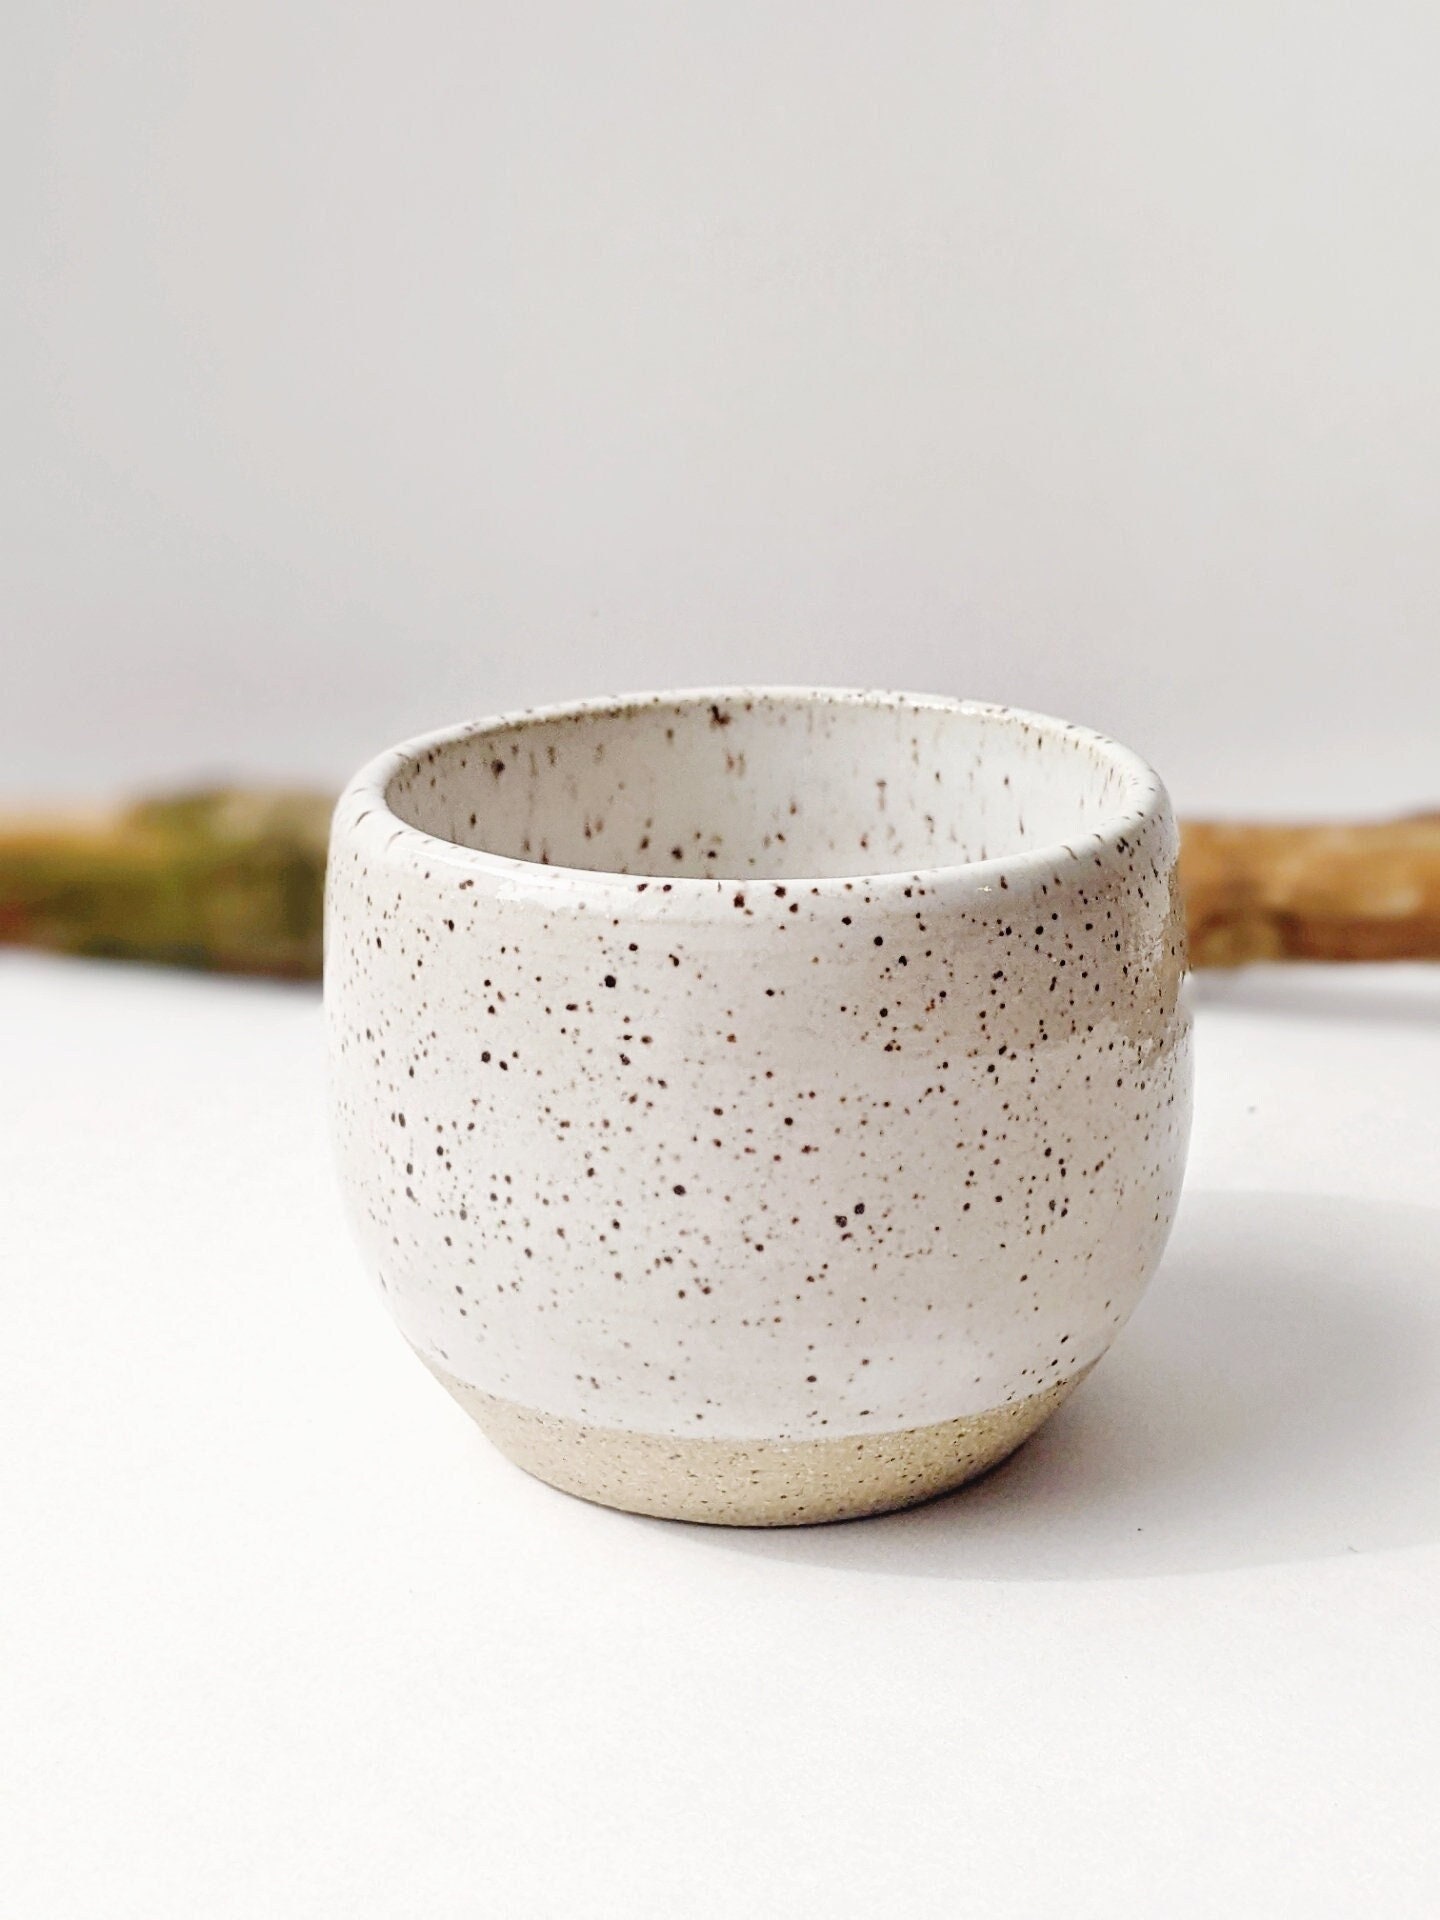 Speckled White Ceramic Espresso Cup Tumbler With Pour Spout Demitasse Cup  Espresso Shot Coffee Shot Glass Handmade Dpottery 